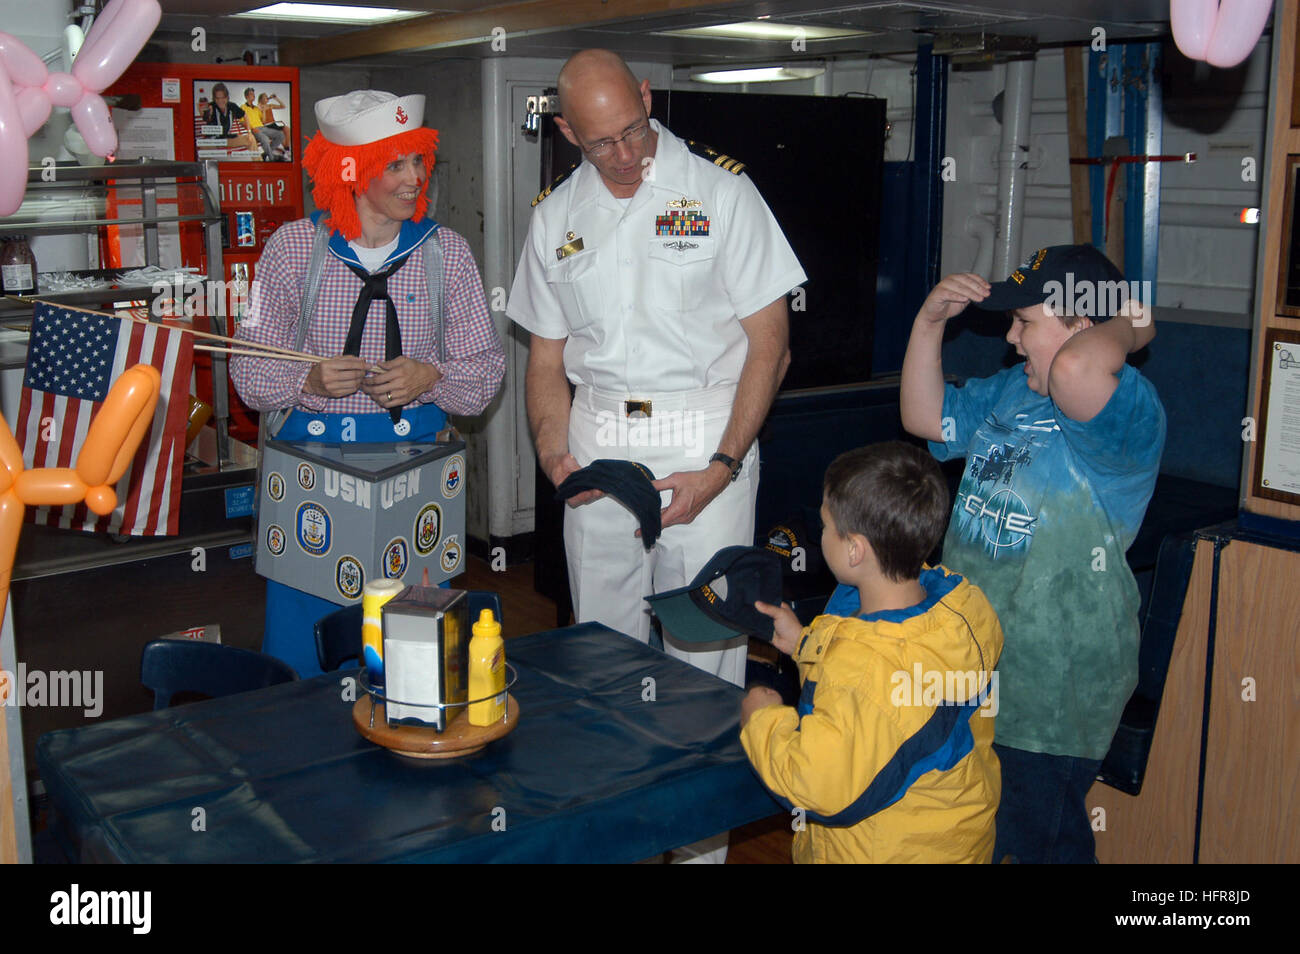 060608-N-6247M-002 Portland, Ore. (June 8, 2006) - USS Ingraham (FFG 61), Commanding Officer Cmdr. Ricks W. Polk and Brenda Johnson (Raggedy Ann) give ship covers to school children during a tour of the ship. Ingraham is making a port call to Portland during the 2006 Rose Festival. U.S. Navy photo by PhotographerÕs Mate 1st Class Bruce McVicar (RELEASED) US Navy 060608-N-6247M-002 USS Ingraham (FFG 61), Commanding Officer Cmdr. Ricks W. Polk and Brenda Johnson (Raggedy Ann) give ship covers to school children during a tour of the ship Stock Photo